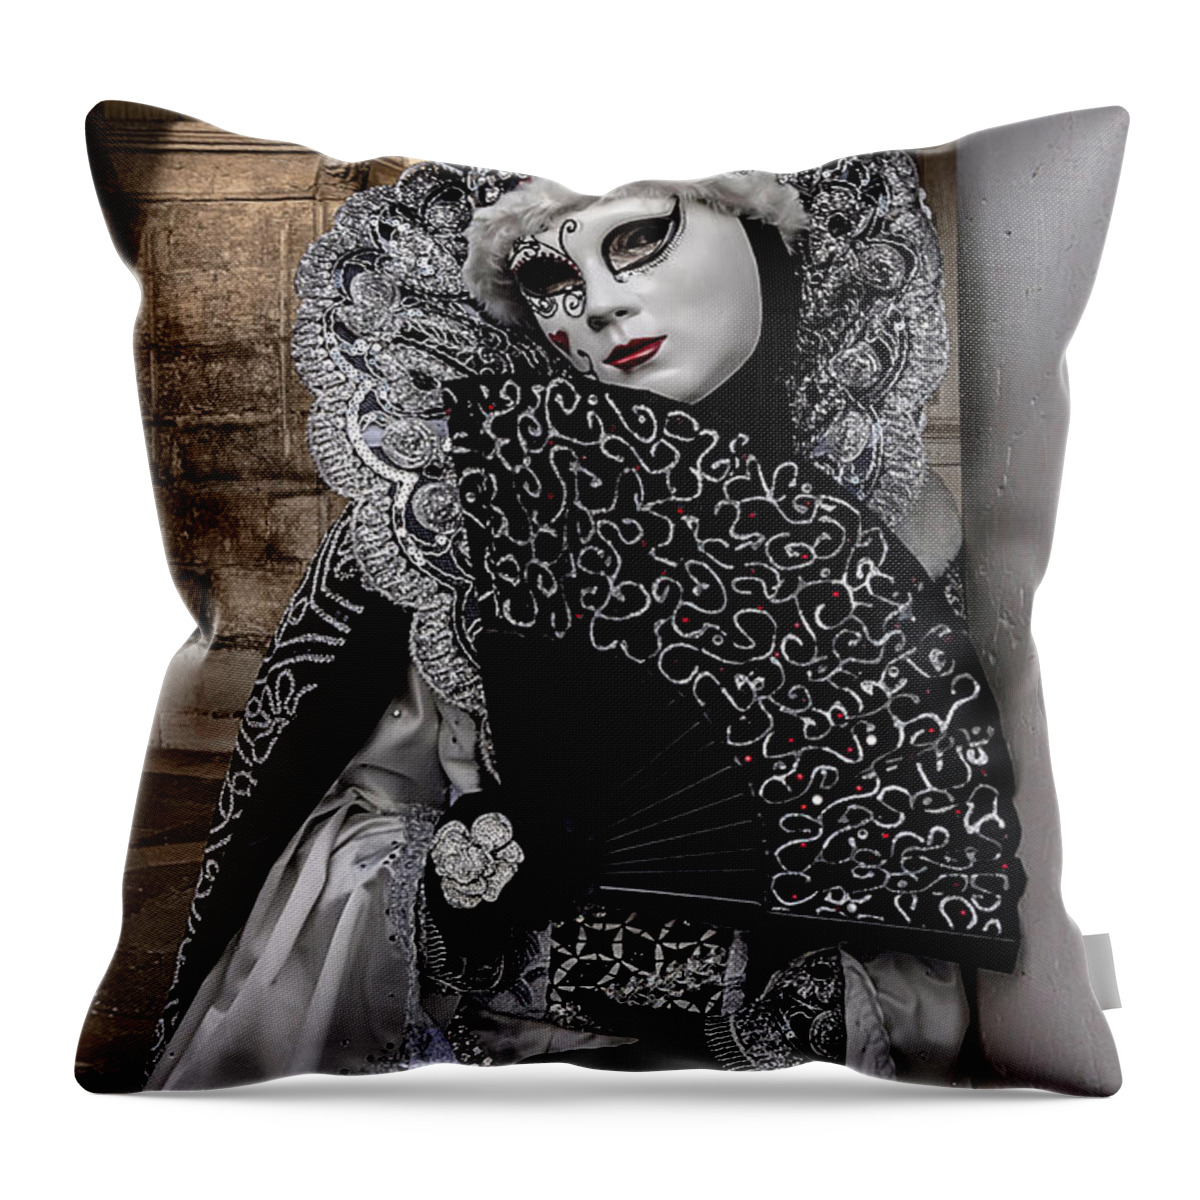 2019 Throw Pillow featuring the photograph Venetian Mask 2019 010 by Wolfgang Stocker